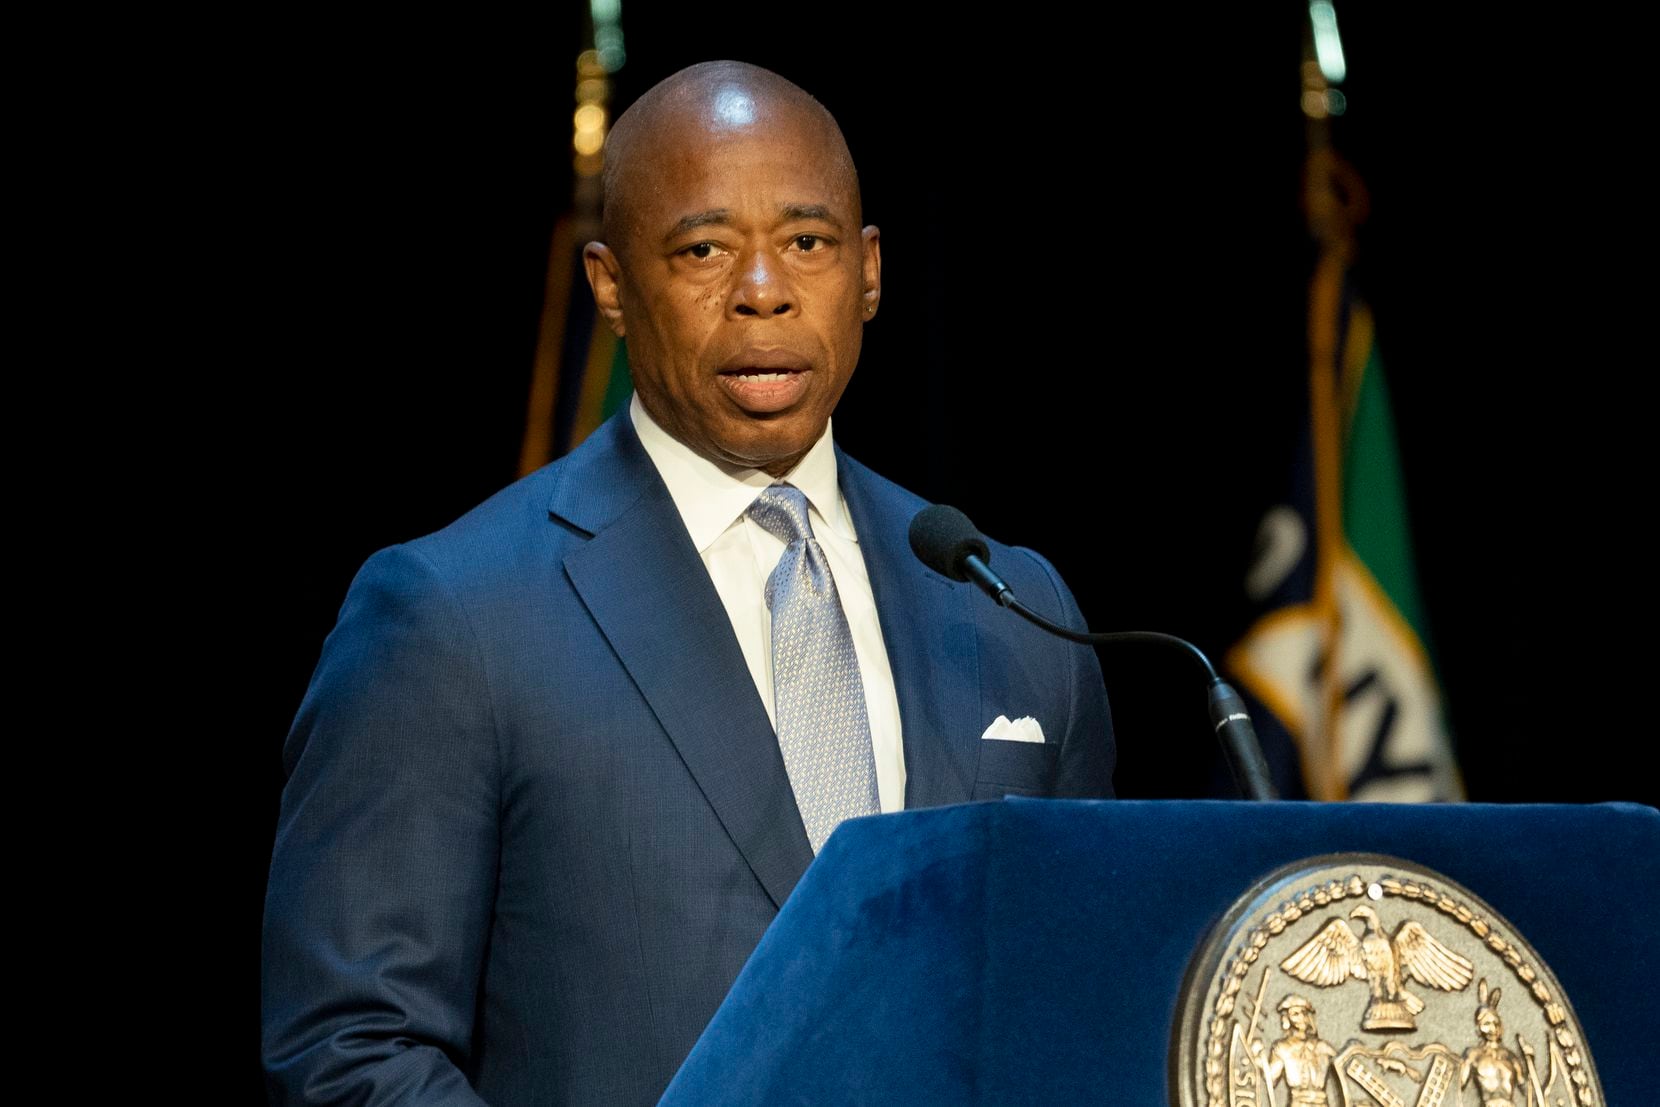 Mayor Eric Adams spoke during a graduation ceremony at Madison Square Garden on July 1...